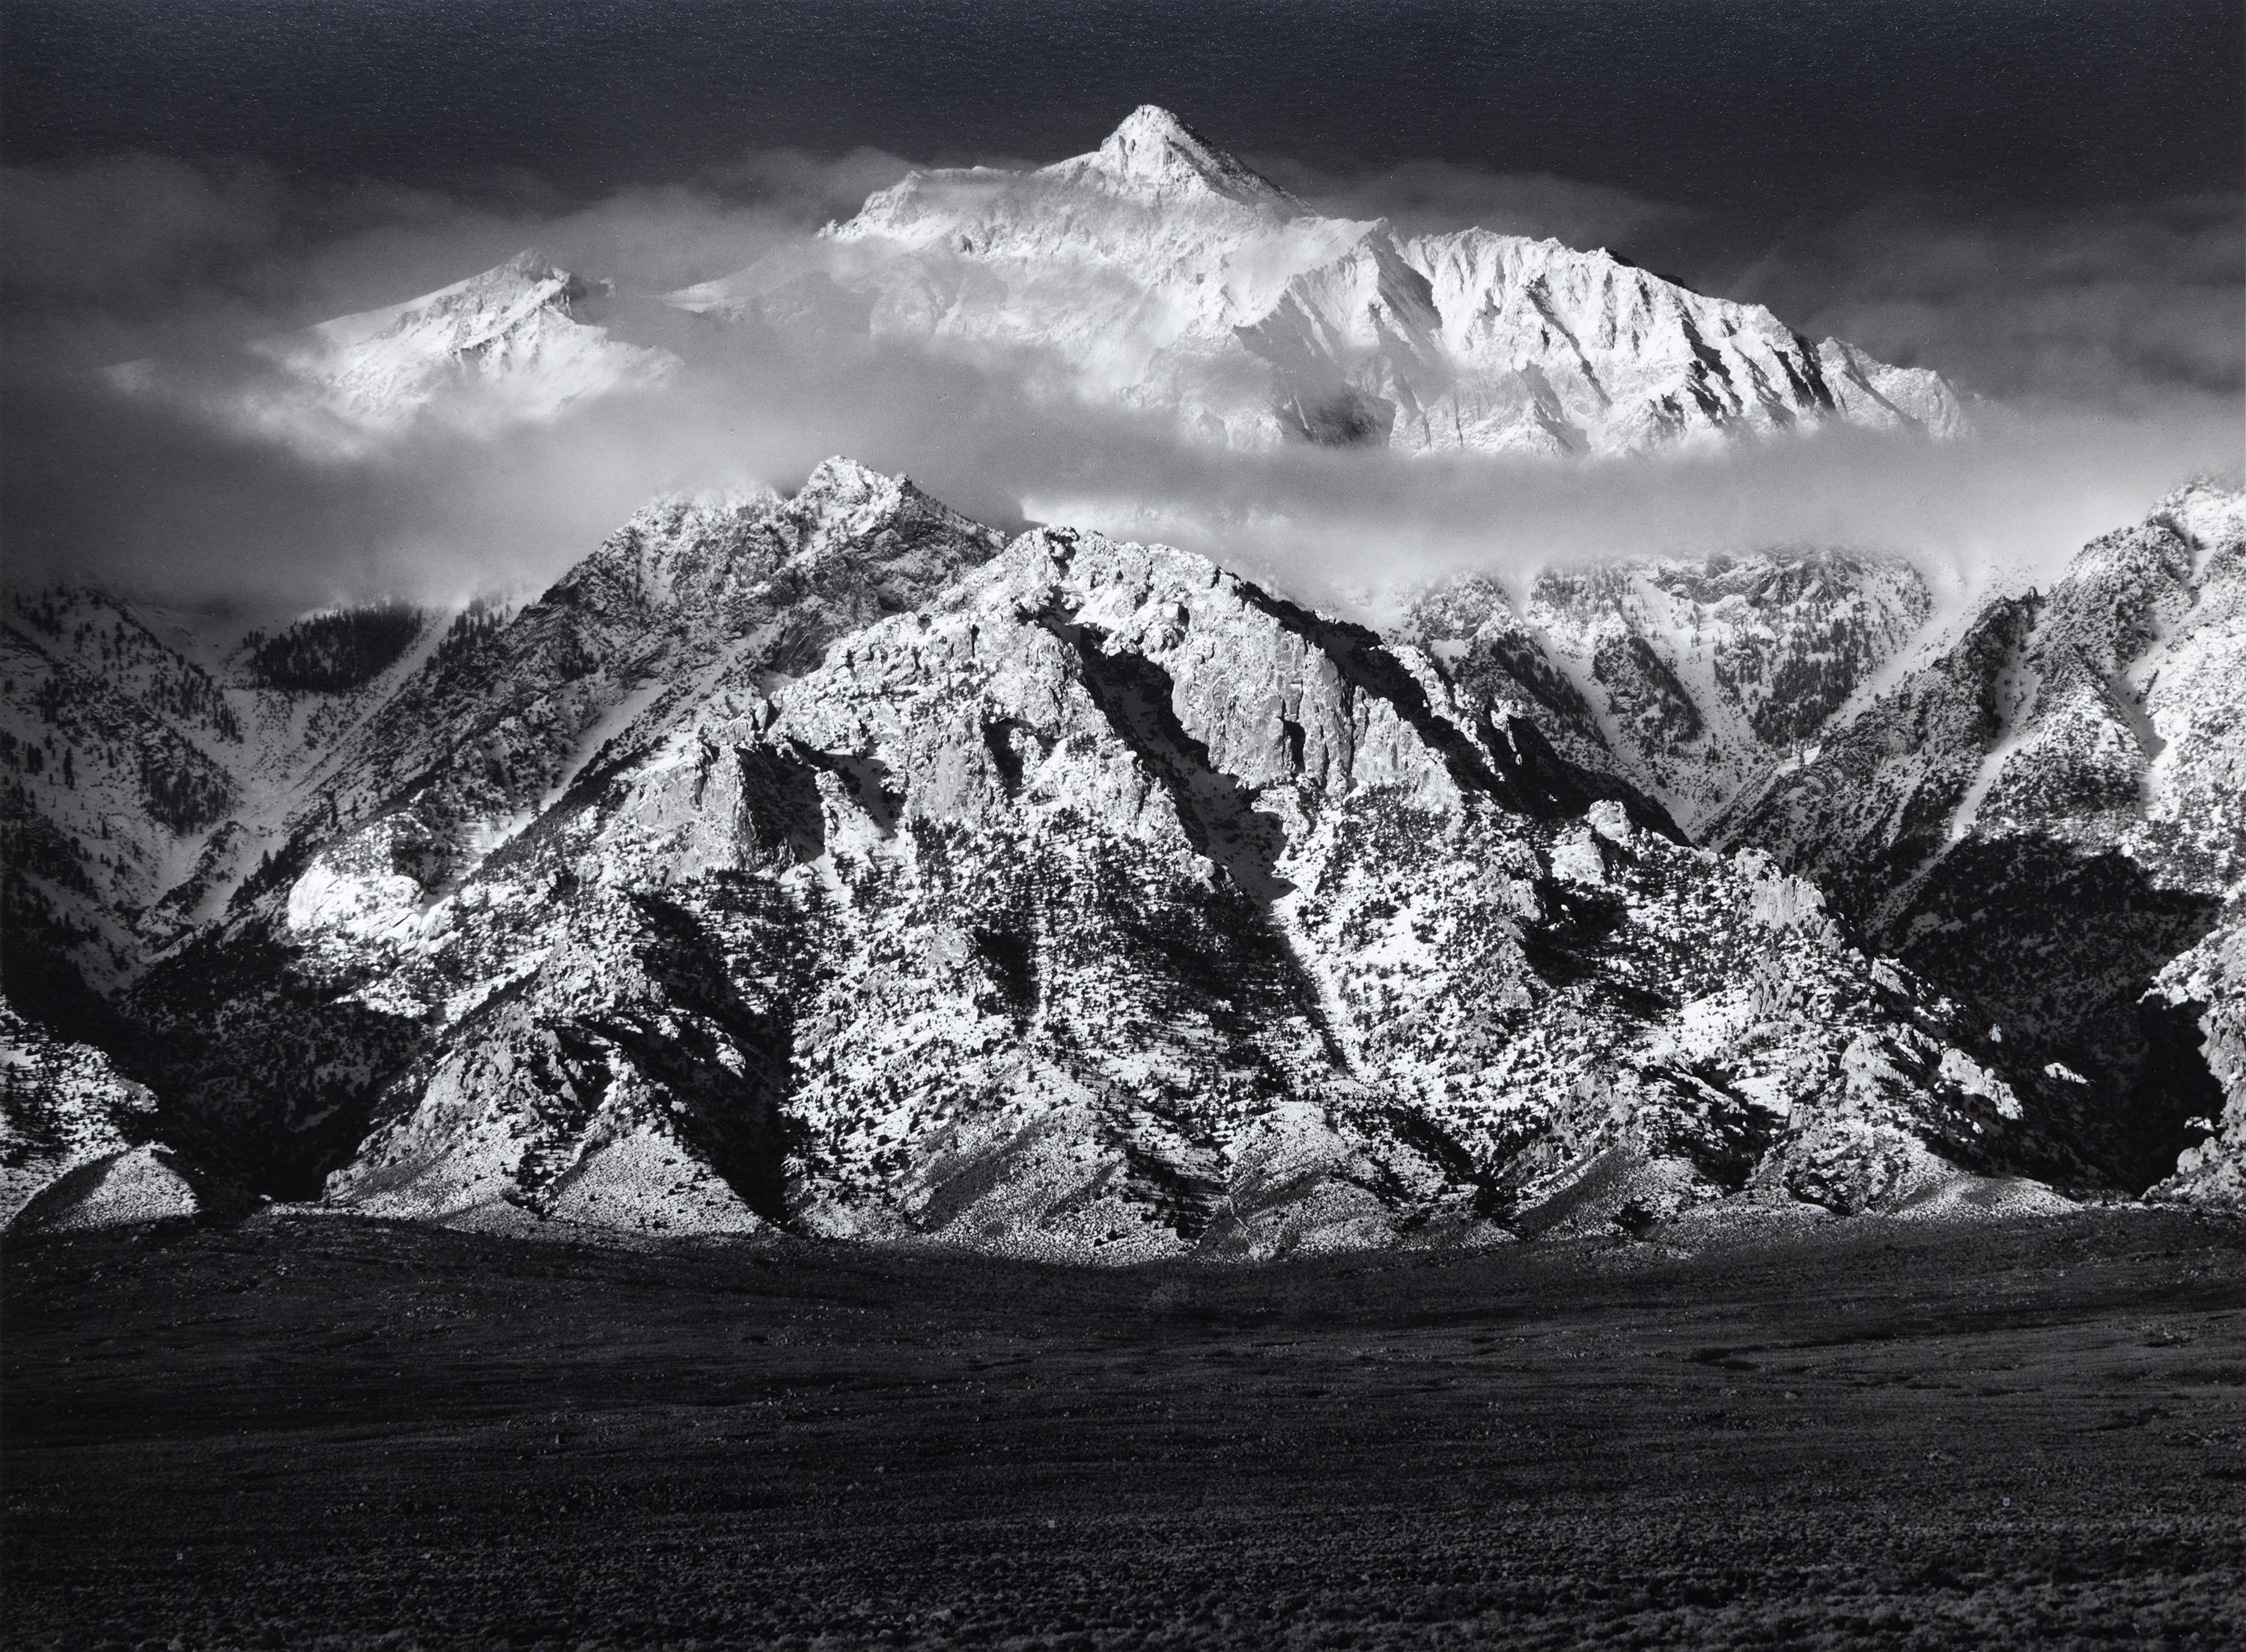 What was Ansel Adams concept?